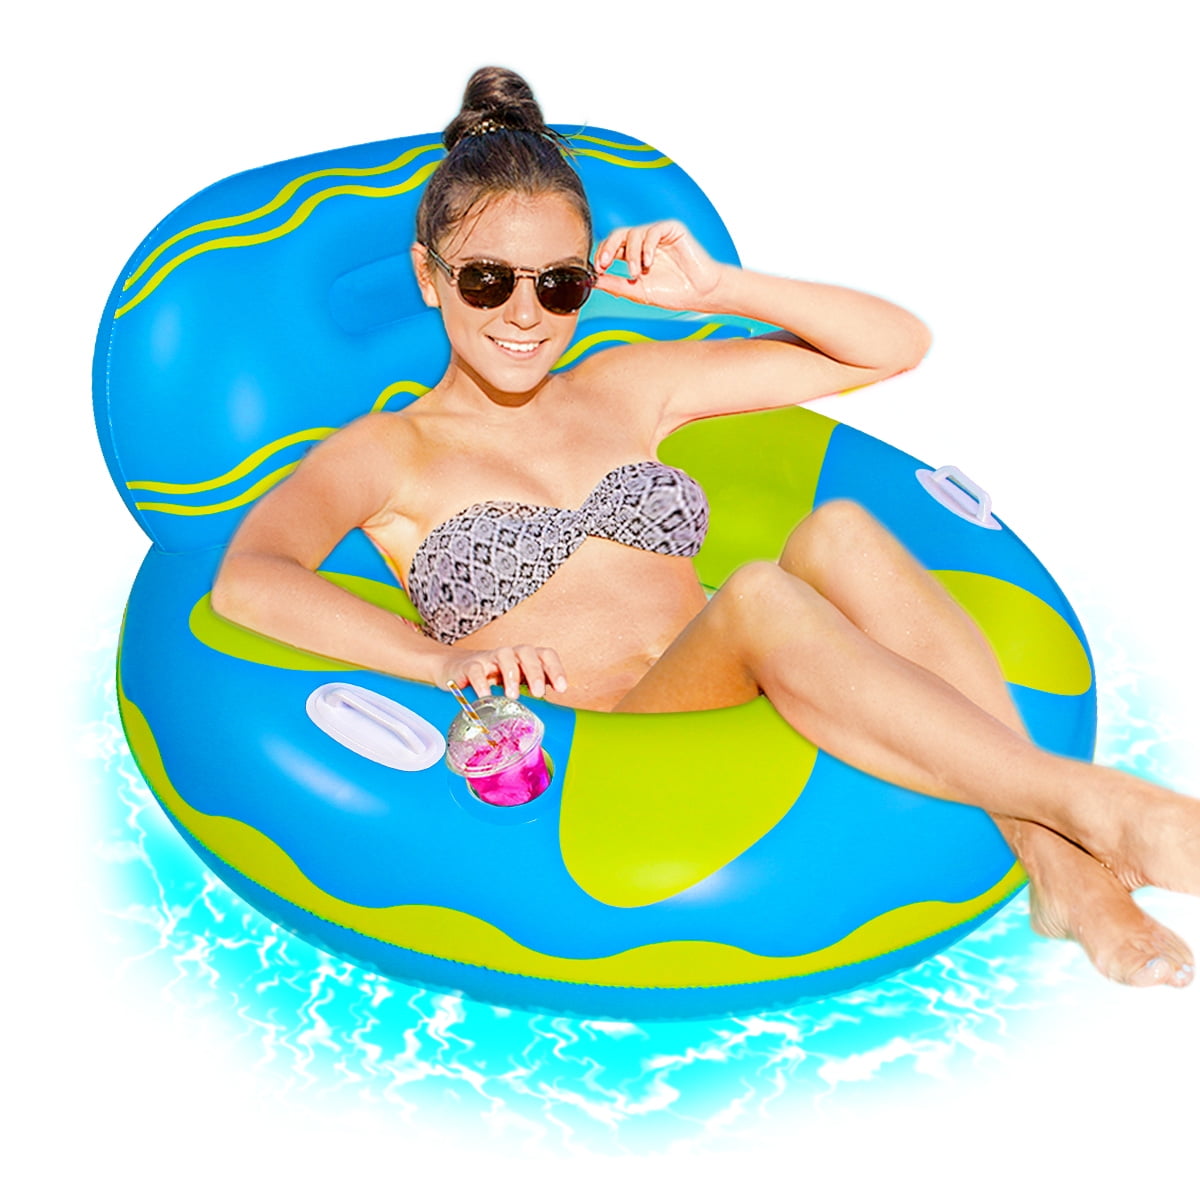 Inflatable Chair Floats Colors May Vary Sit N Float Inflatable Colorful Floating Loungers with Built-in Cup Holders Durable Handles and Supportive Head Pillow for Kids Adults Green and Yellow